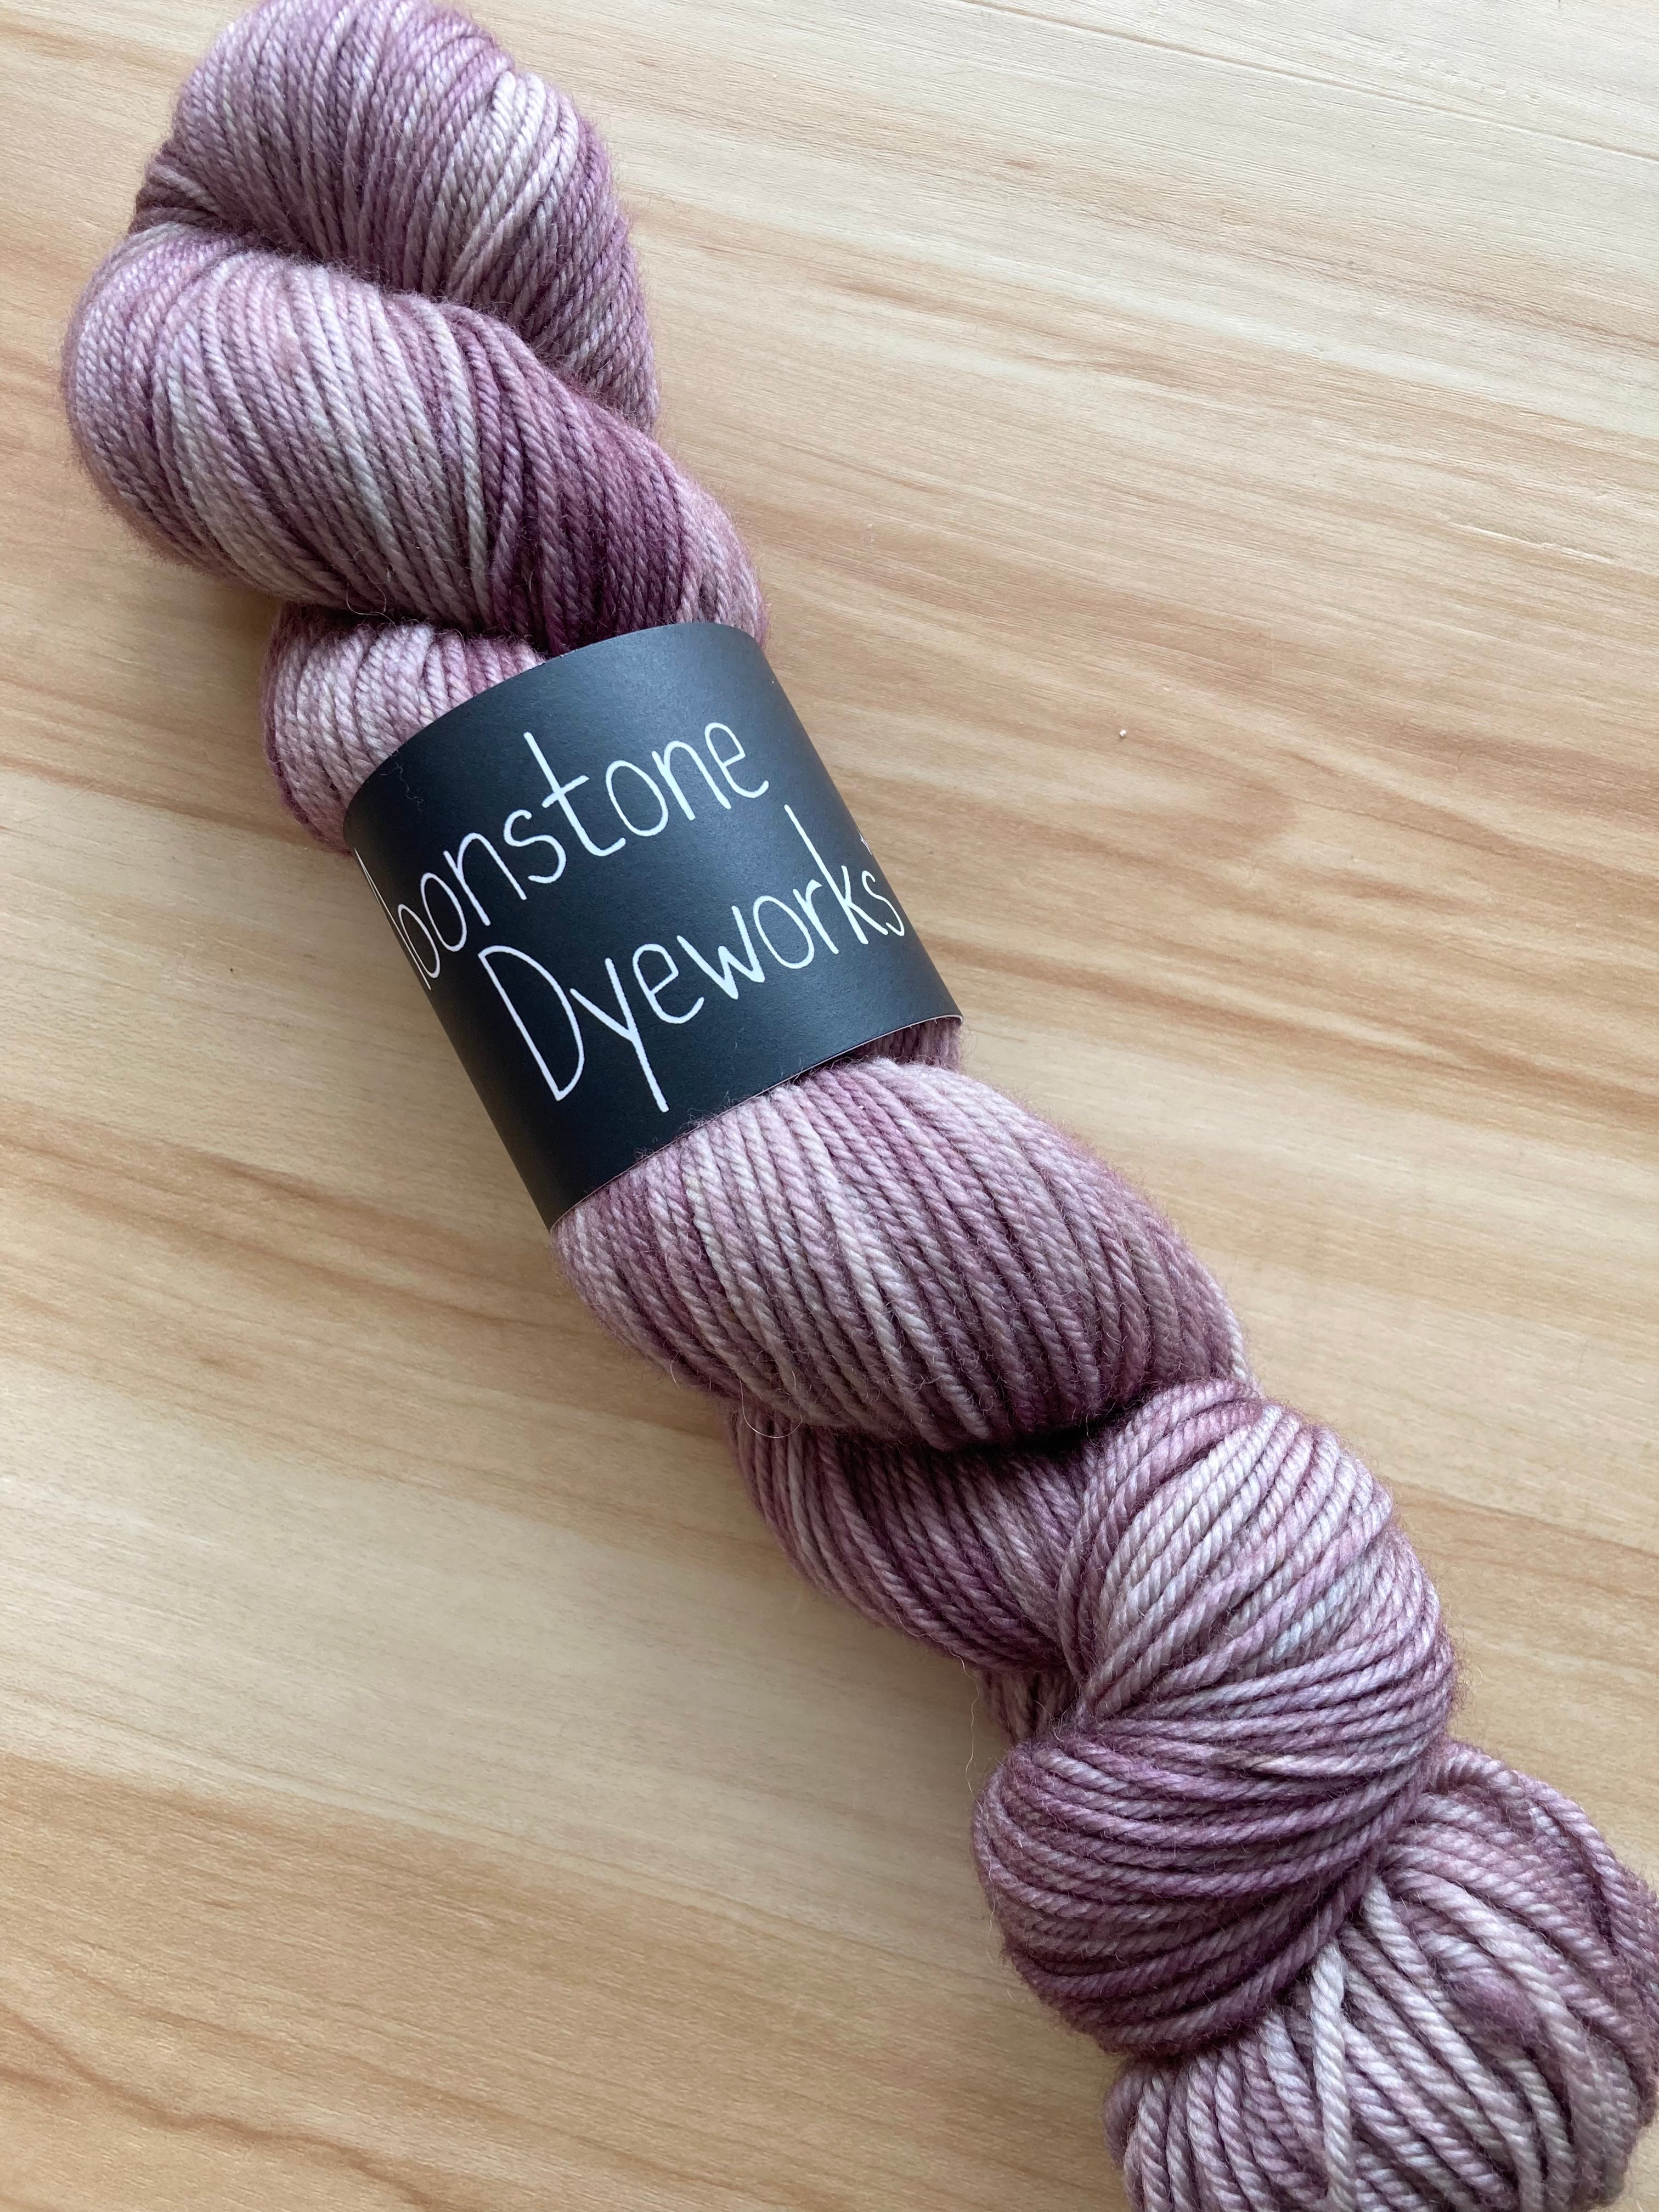 Indifference - Merino DK from Moonstone Dyeworks